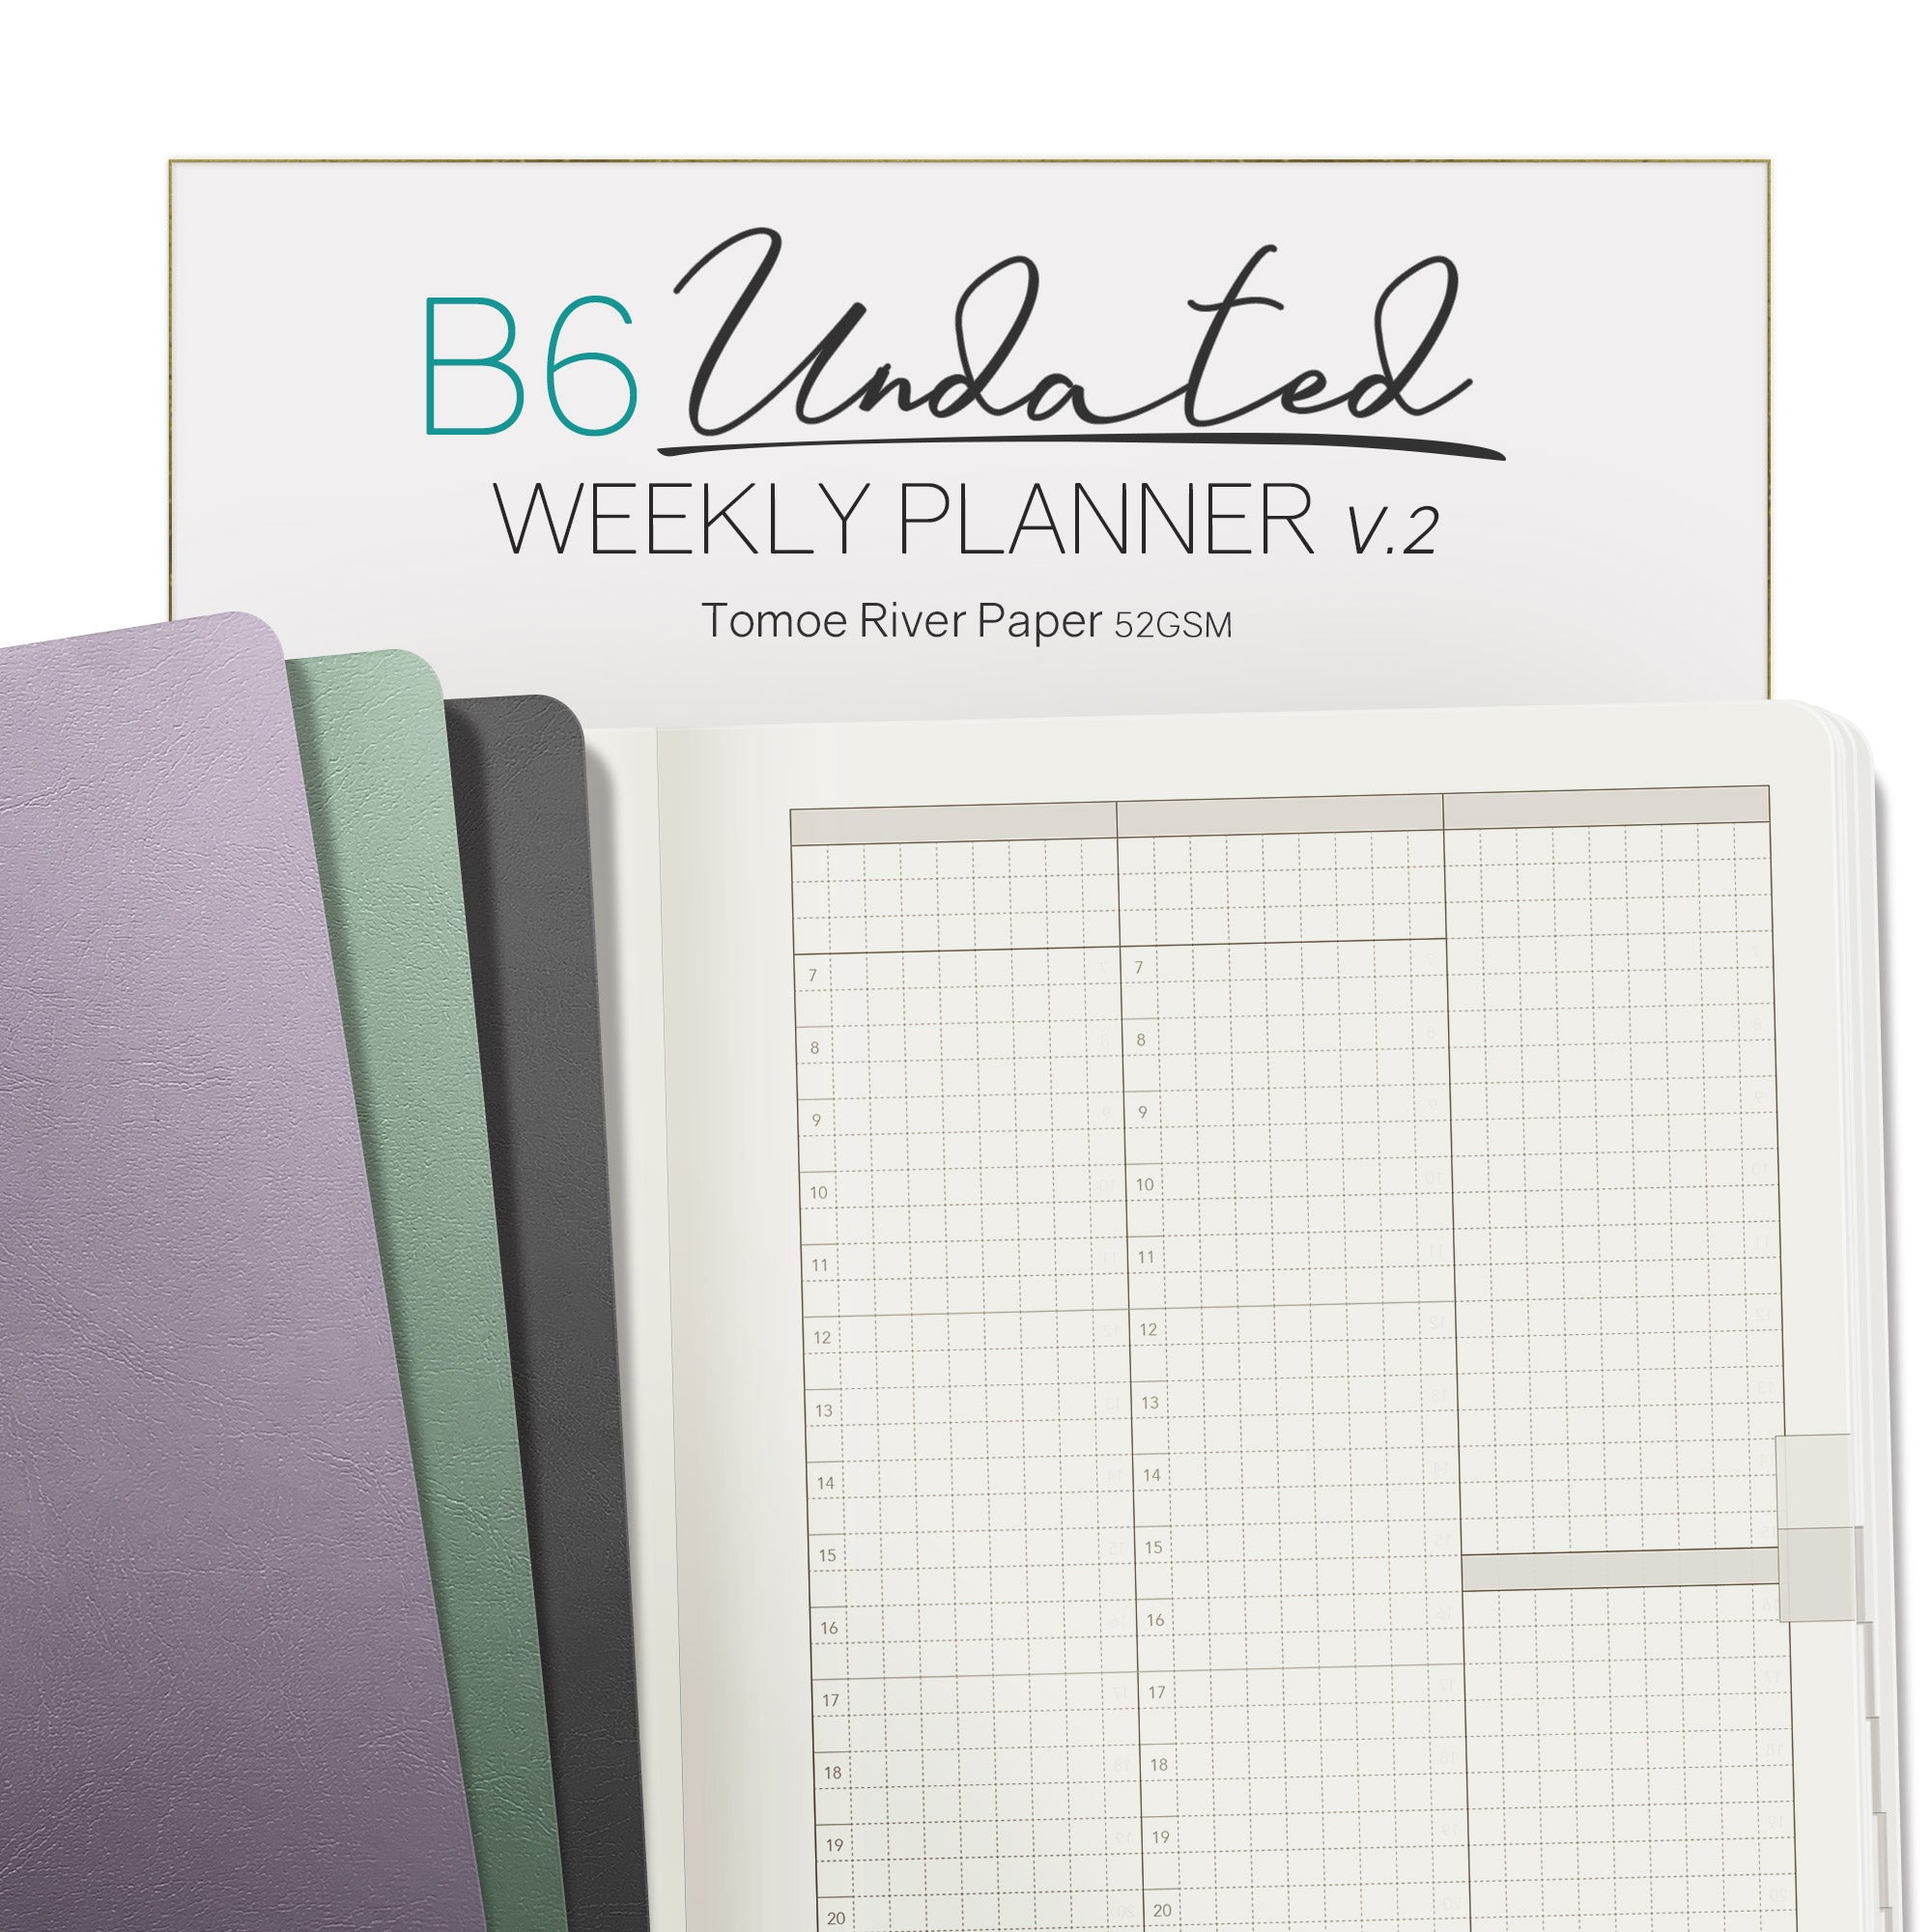 B6 Undated Weekly Planner v.2 - 2023 Edition